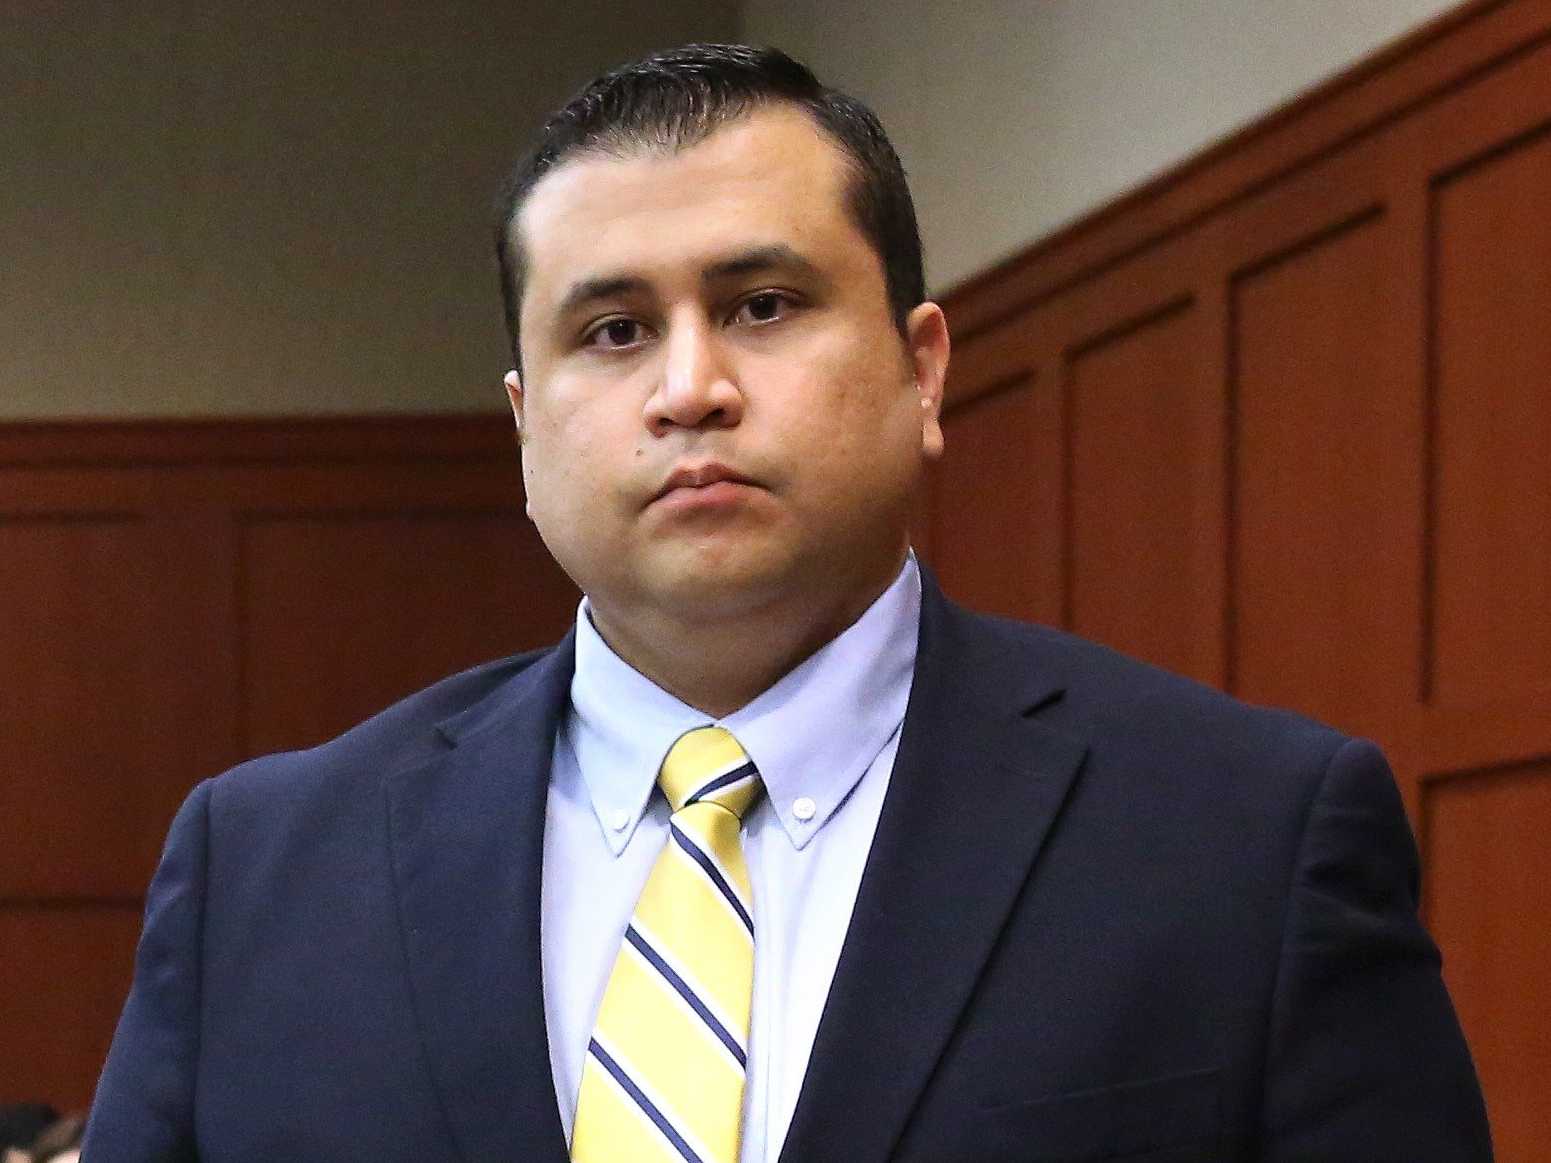 MEDICAL EXAMINER IN ZIMMERMAN CASE SUES FOR $100 M, CLAIMS PROSECUTION THREW CASE ...1551 x 1163